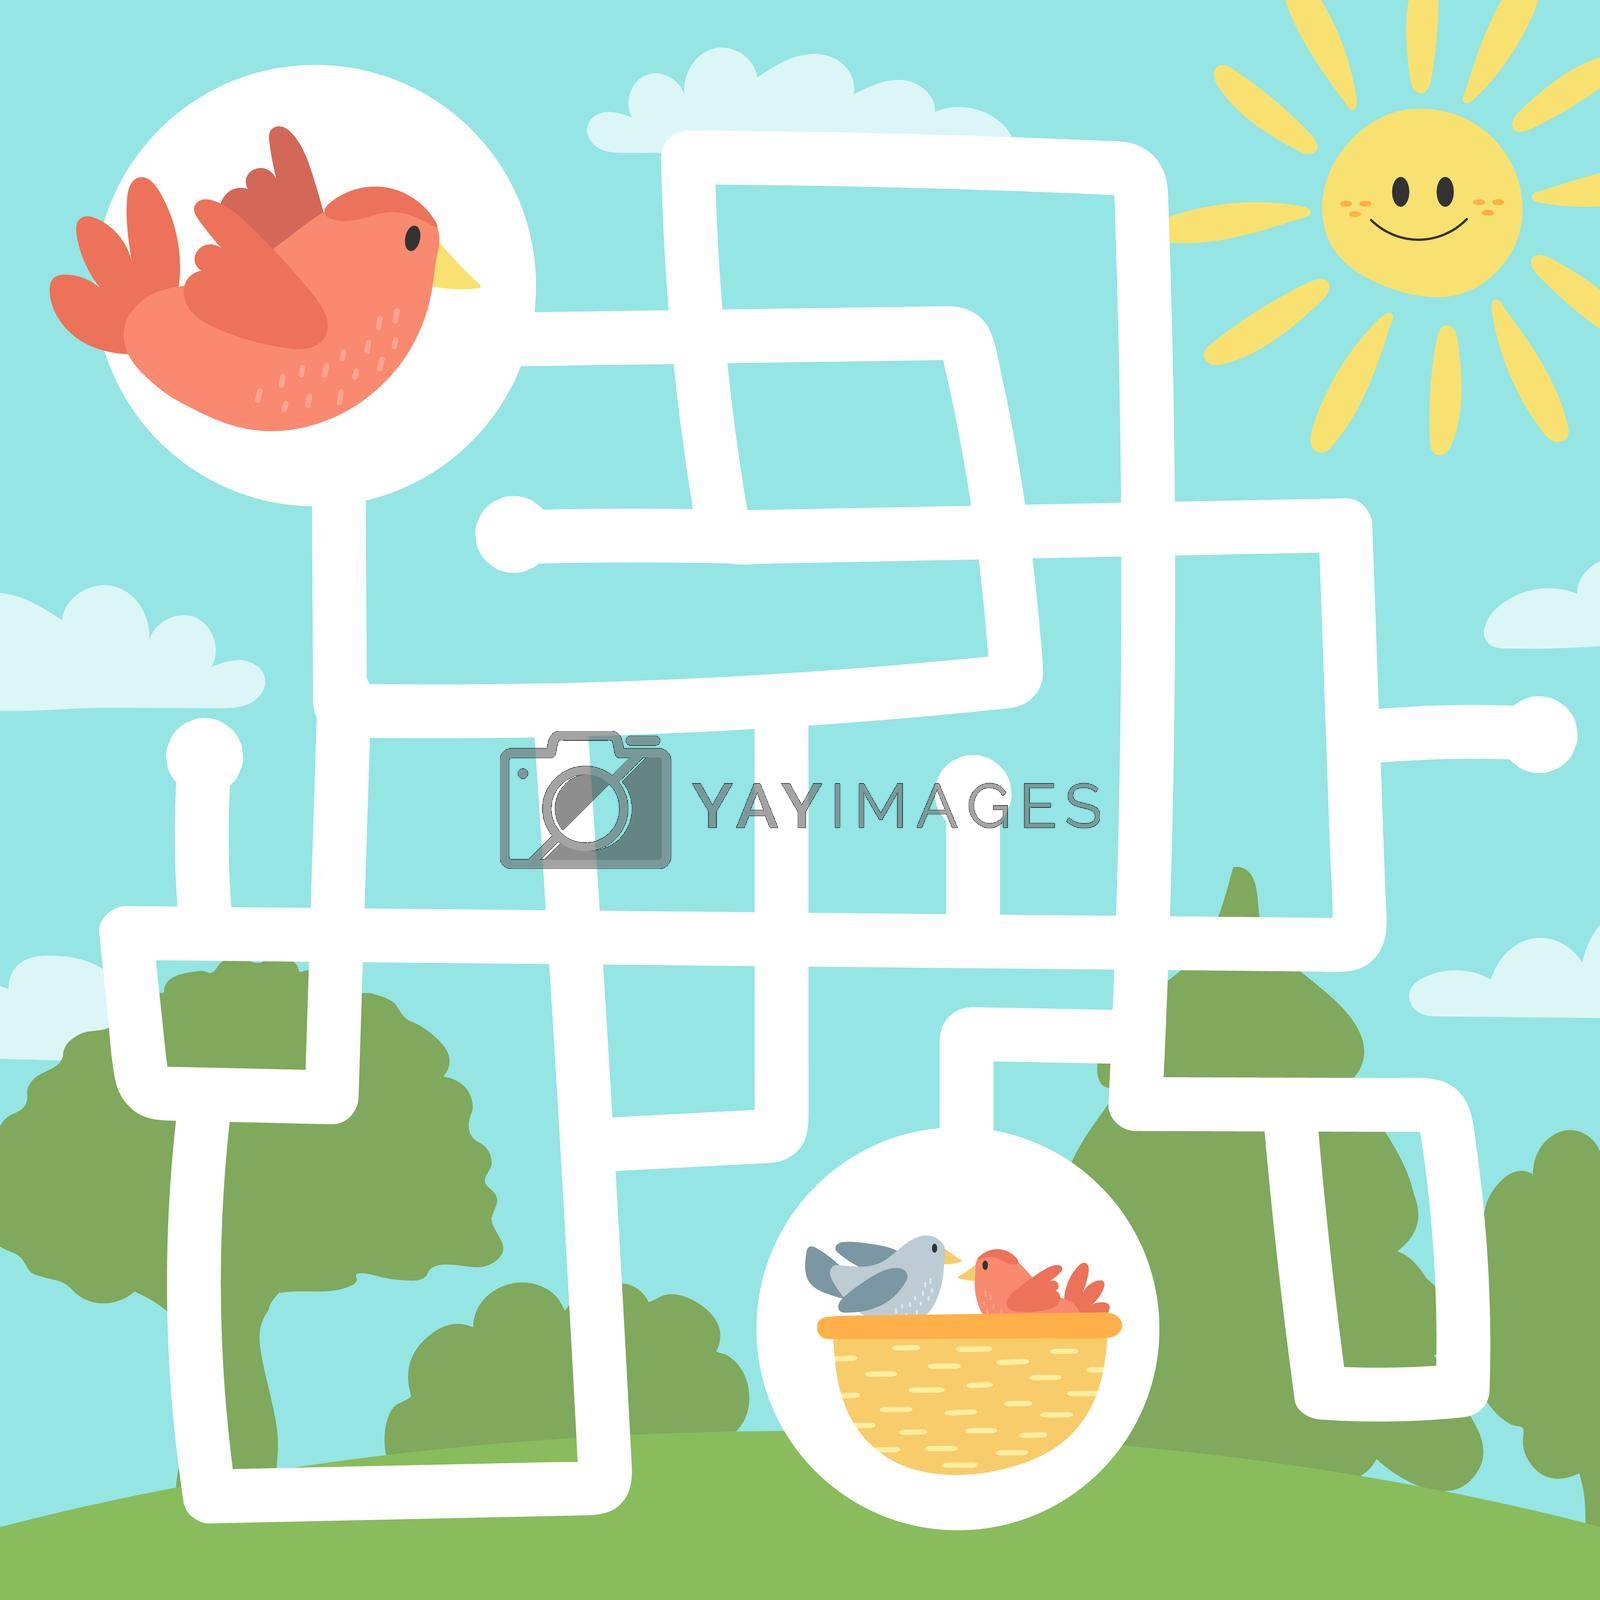 Maze game for children, education worksheet. Bird and nest with chicks. Easy difficulty level for preschoolers